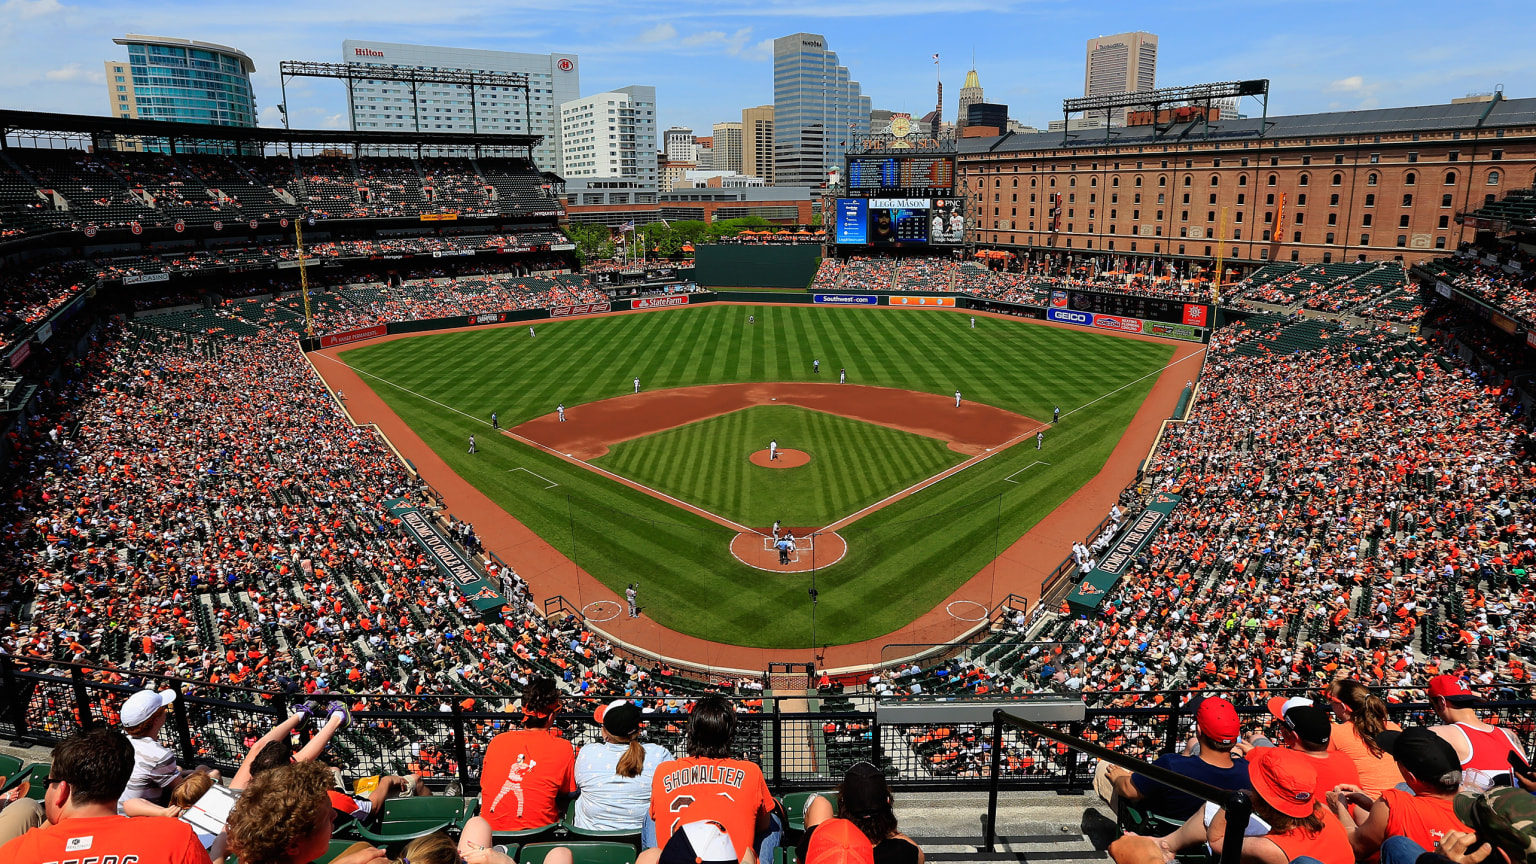 Eutaw Street, Oriole Park at Camden Yards. Baltimore, MD Vi…